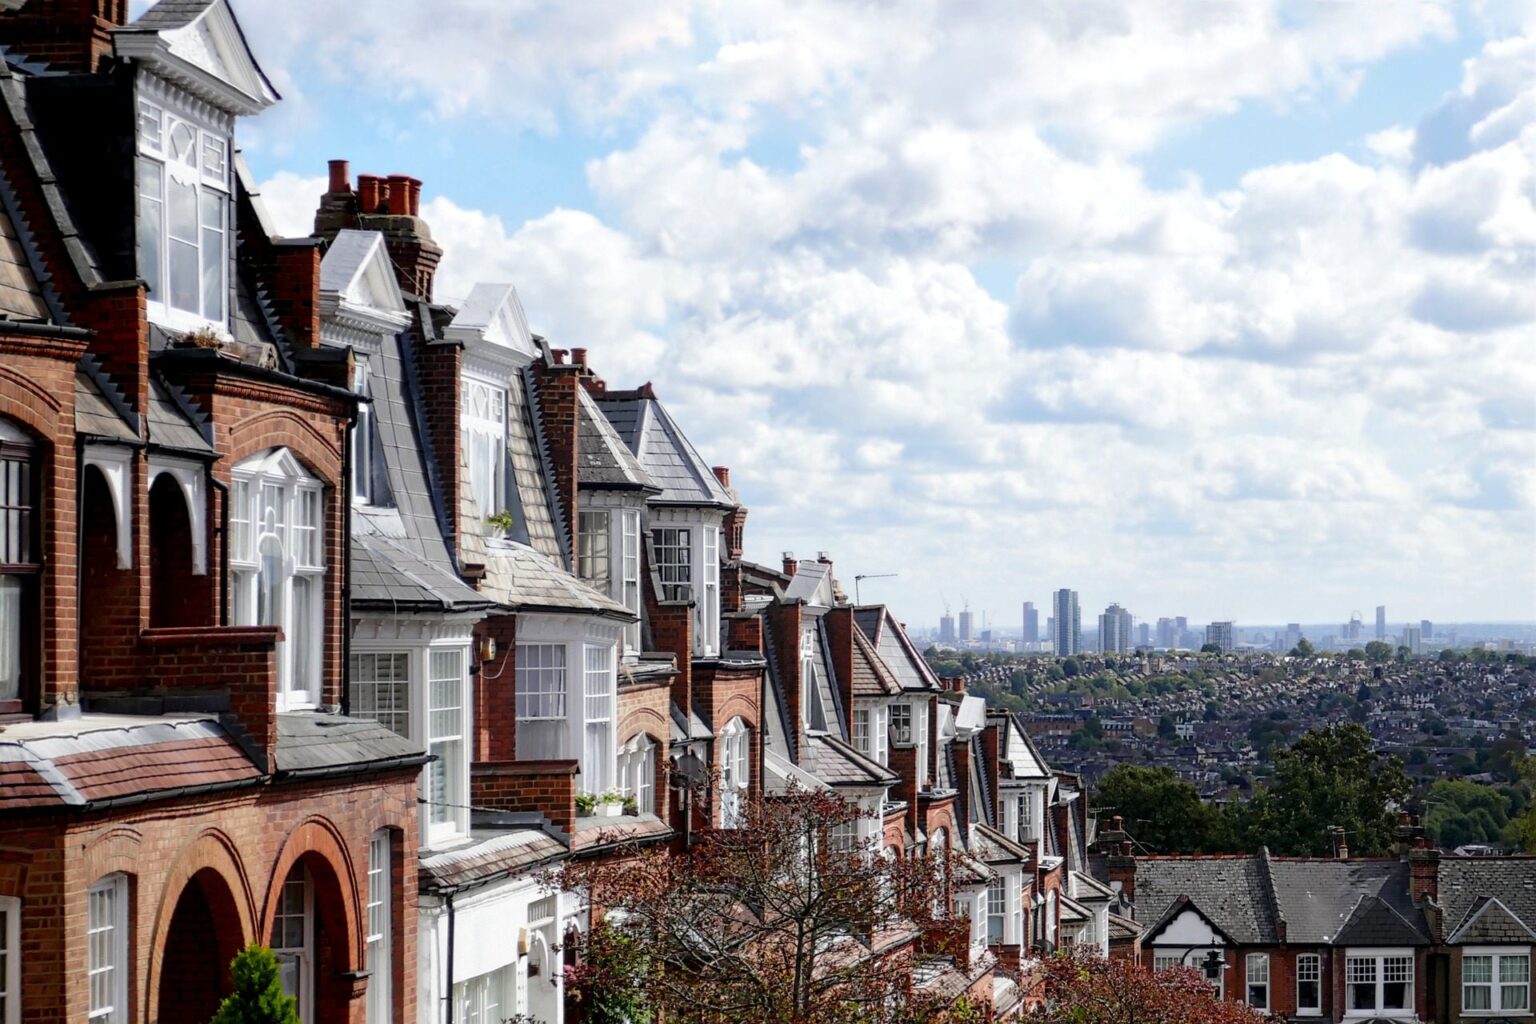 A view of beautiful houses in North London